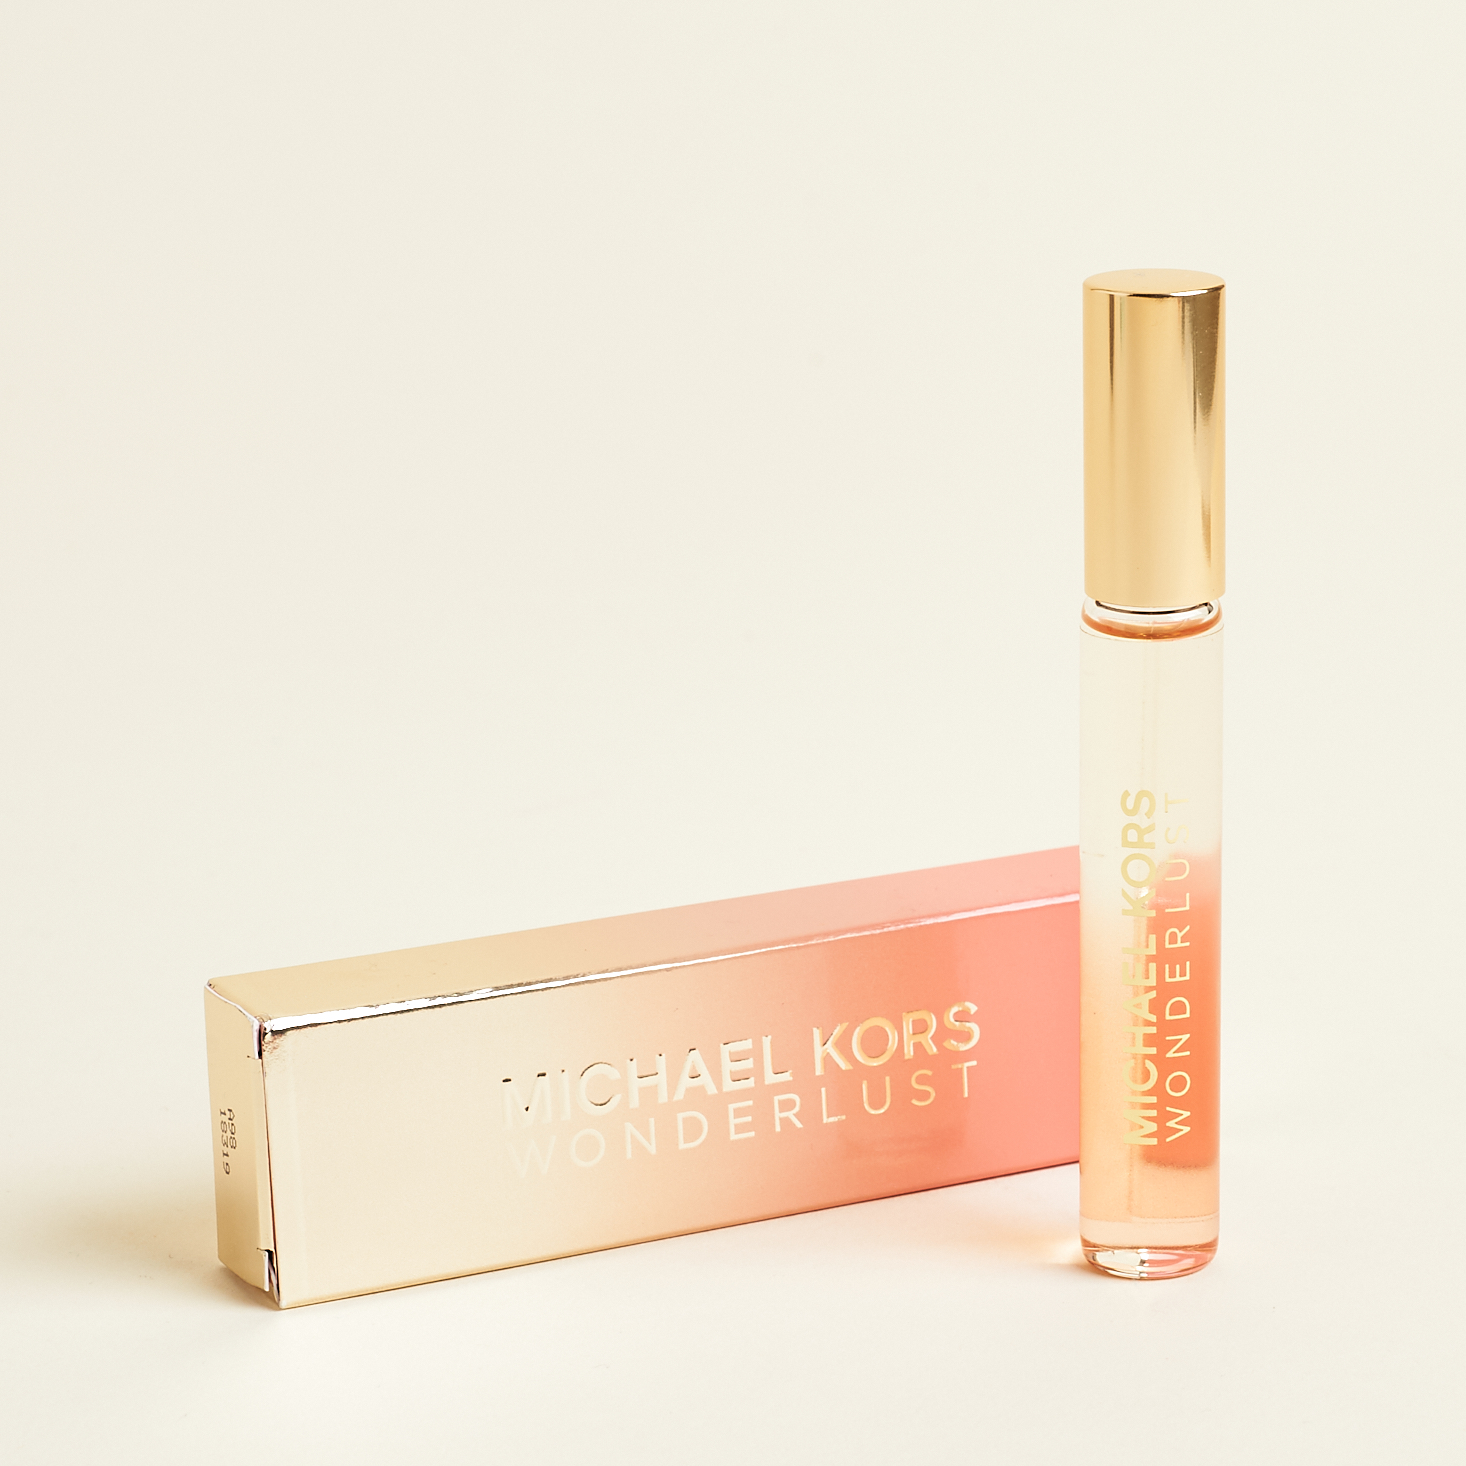 rollerball of perfume against pink and gold ombre box